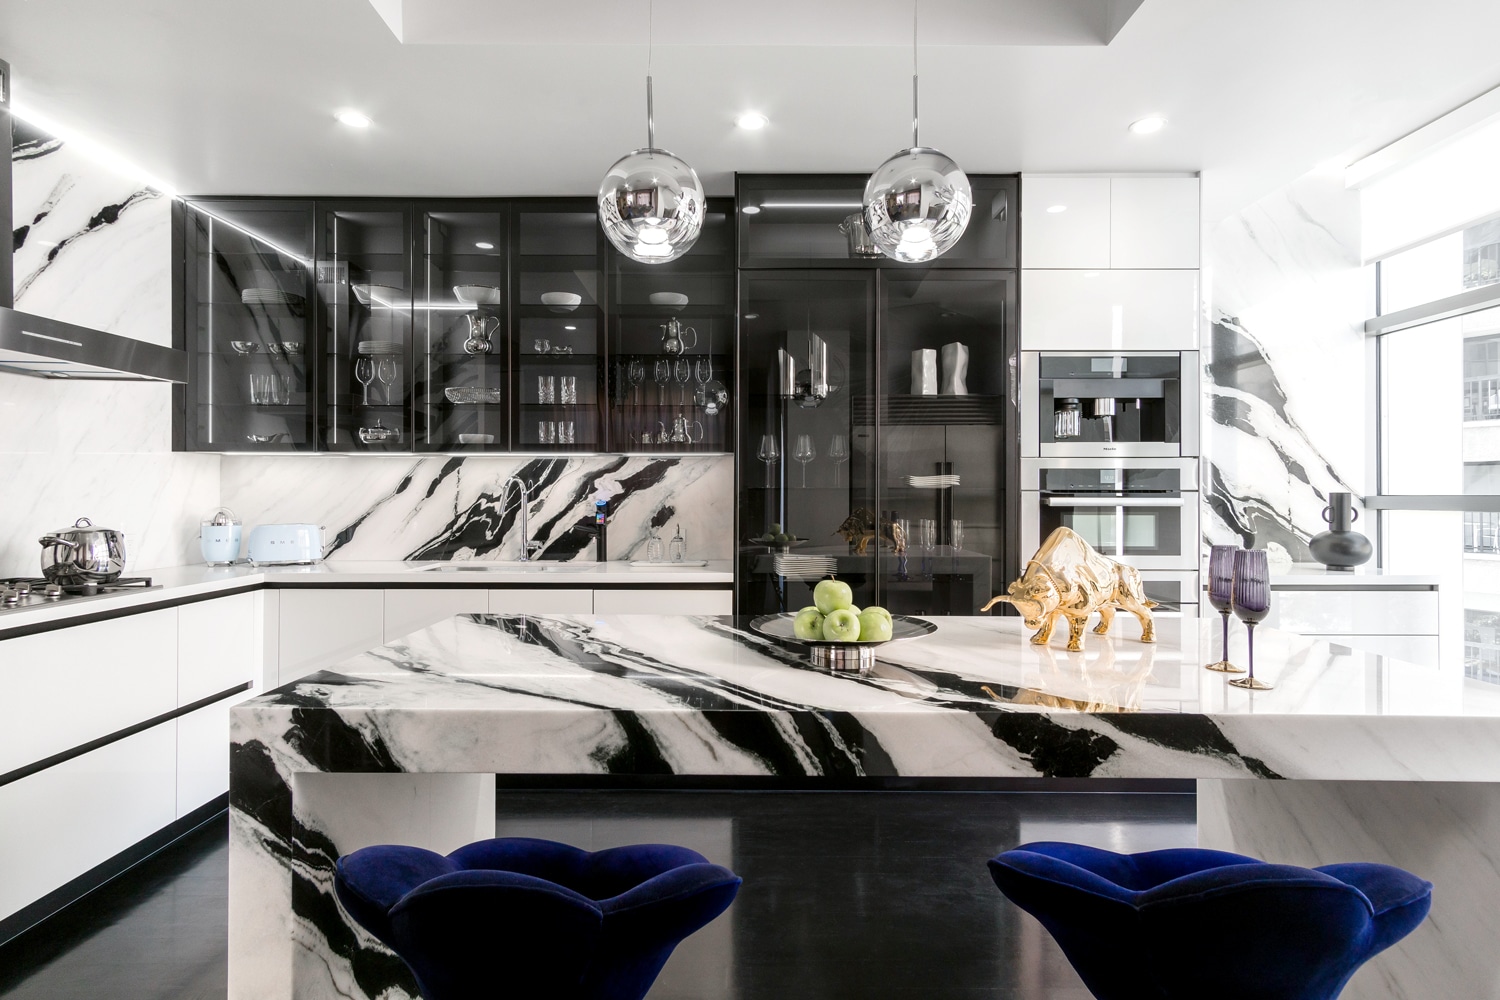 Los Angeles, CA. MandiCasa’s YOTA cabinetry in White Glossy Lacquer and Nero Groove Glossy Lacquer finishes. Senior Designer Consultant of MandiCasa Los Angeles, Reba Sams.